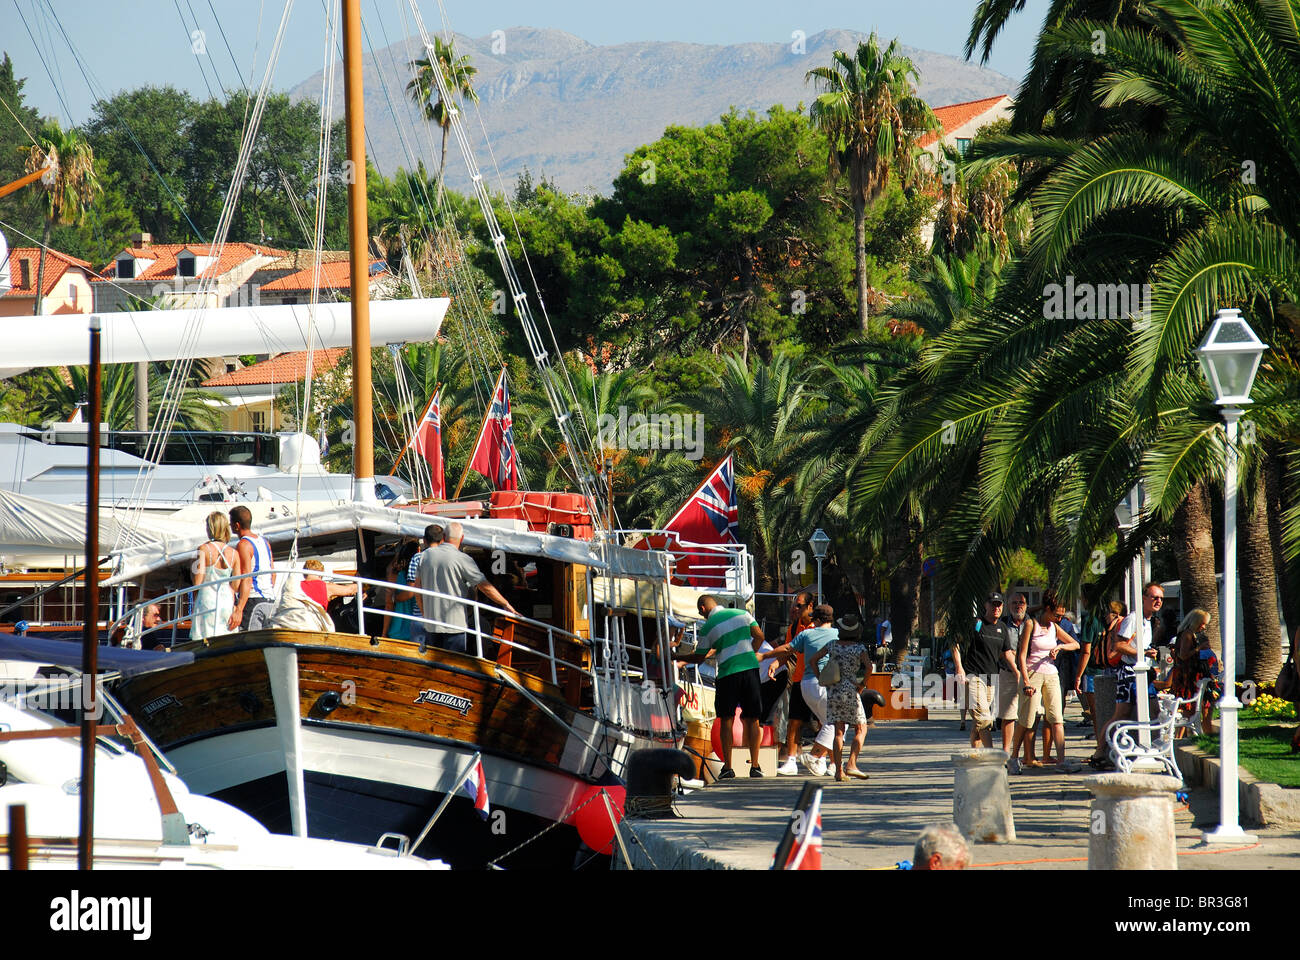 CAVTAT, near DUBROVNIK, CROATIA. A view of the harbour, with tourists arriving by boat from Dubrovnik. Stock Photo